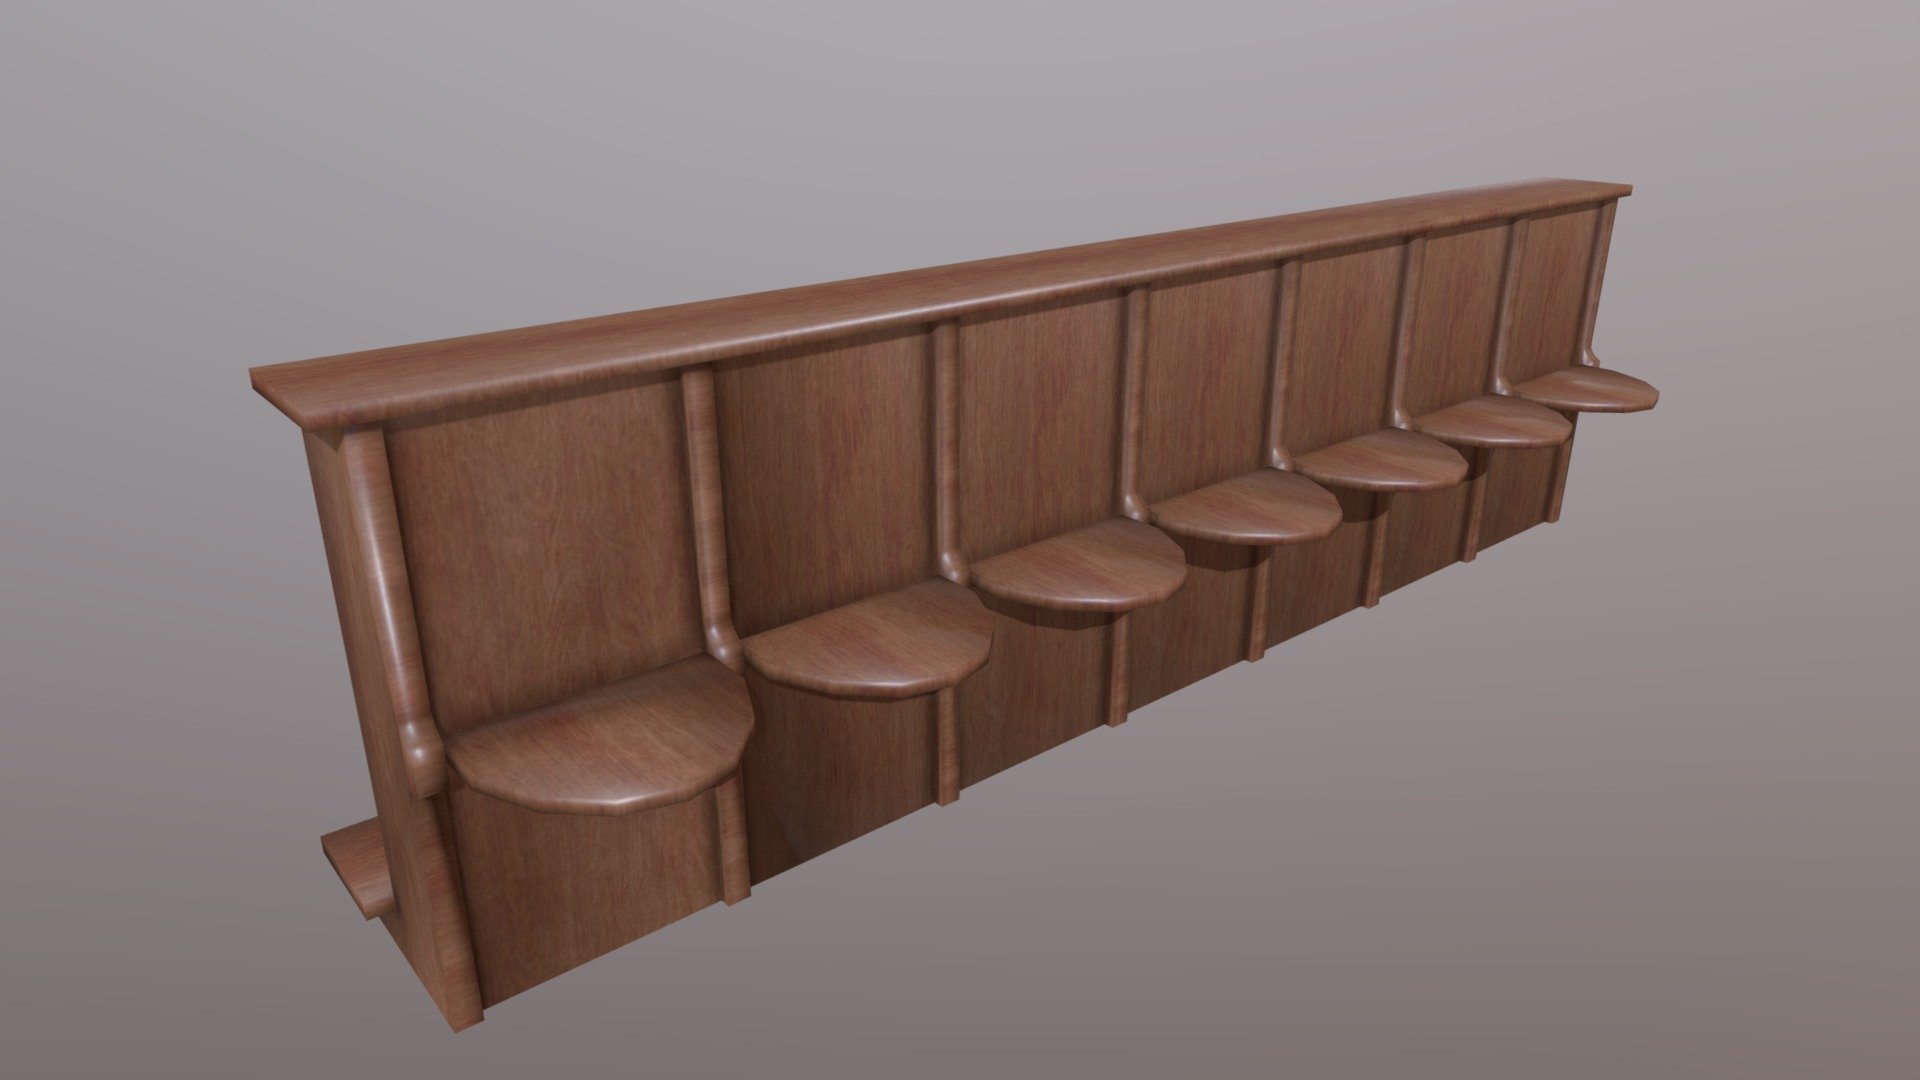 Church bench based on Milan cathedral bench. Low poly, game ready 3d model